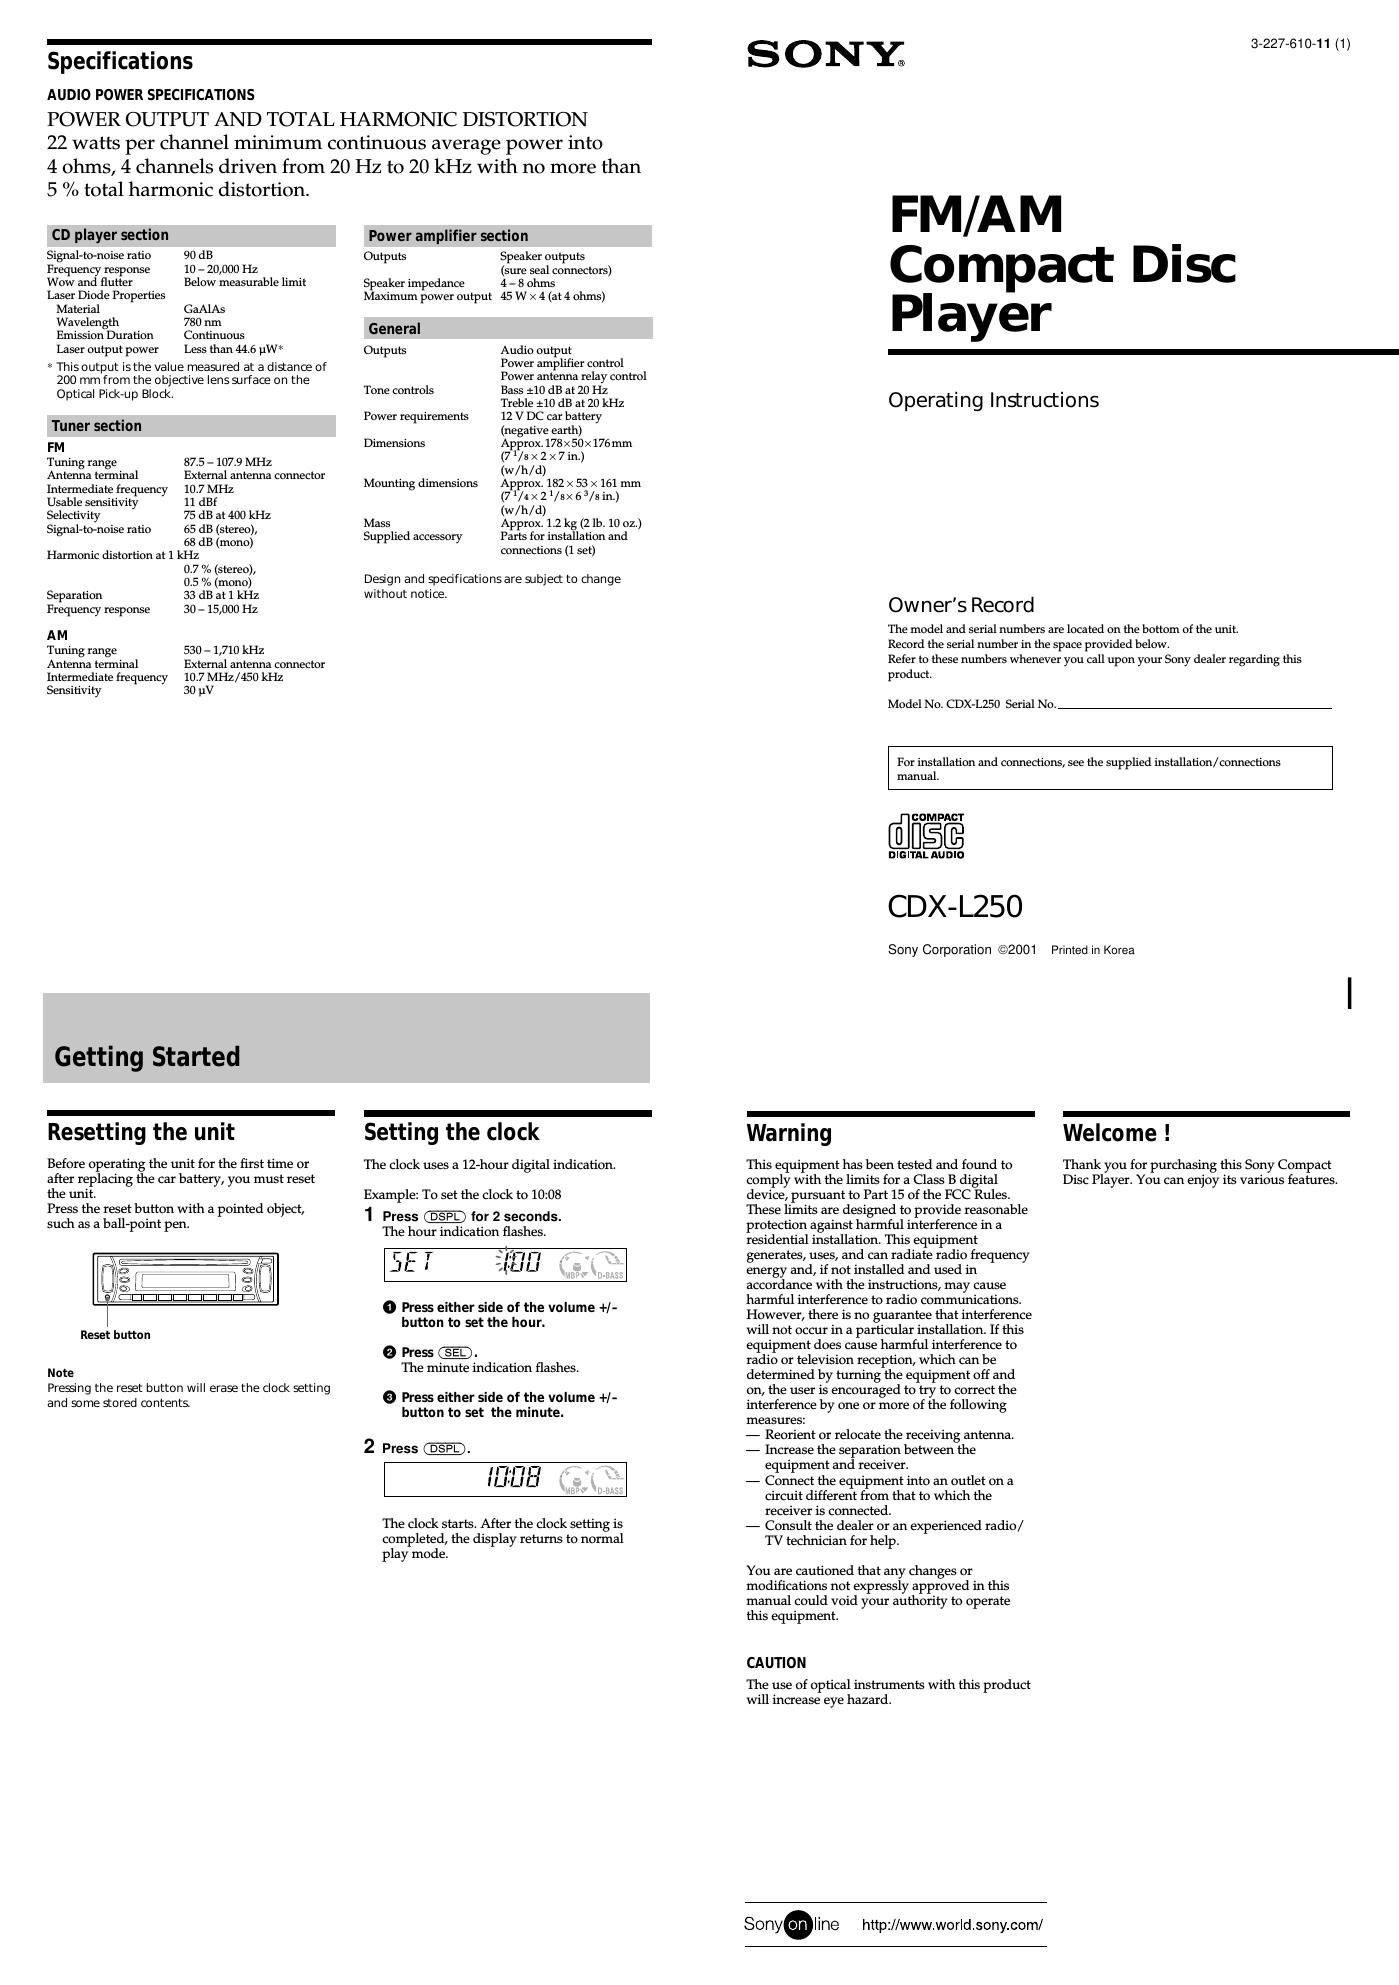 sony cdx l 250 owners manual